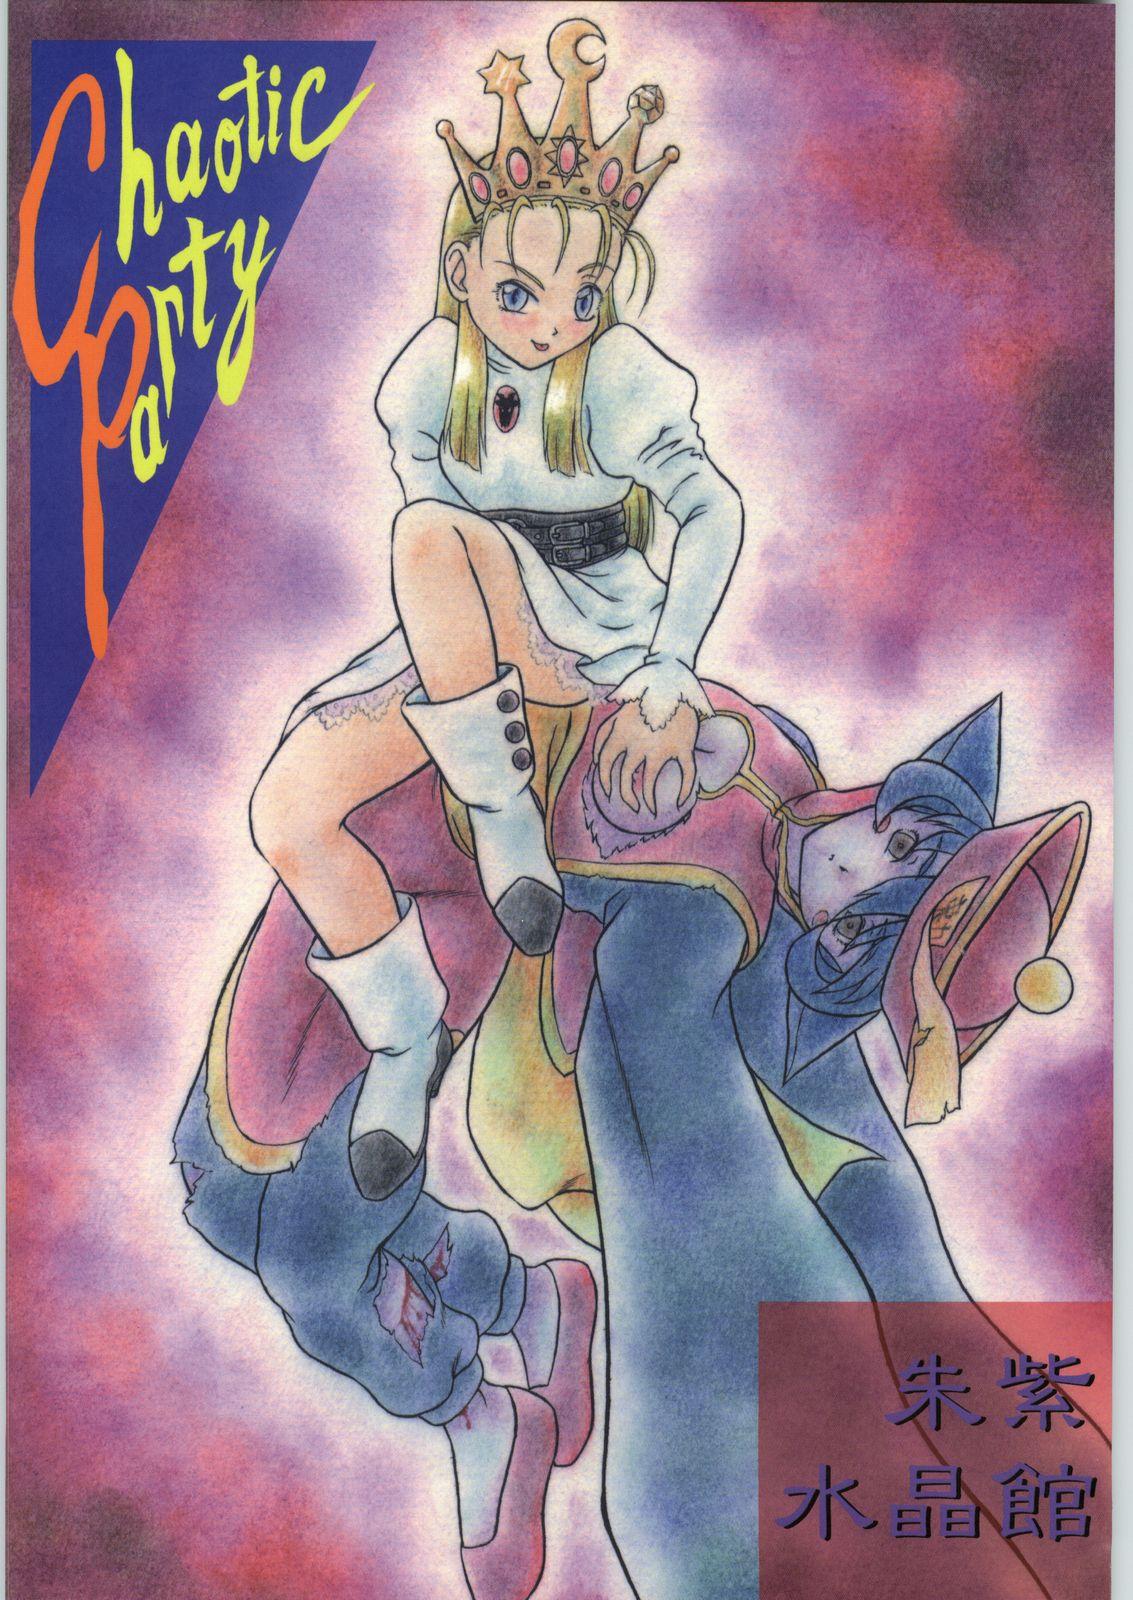 Romance Chaotic Party - Darkstalkers Buttfucking - Picture 1